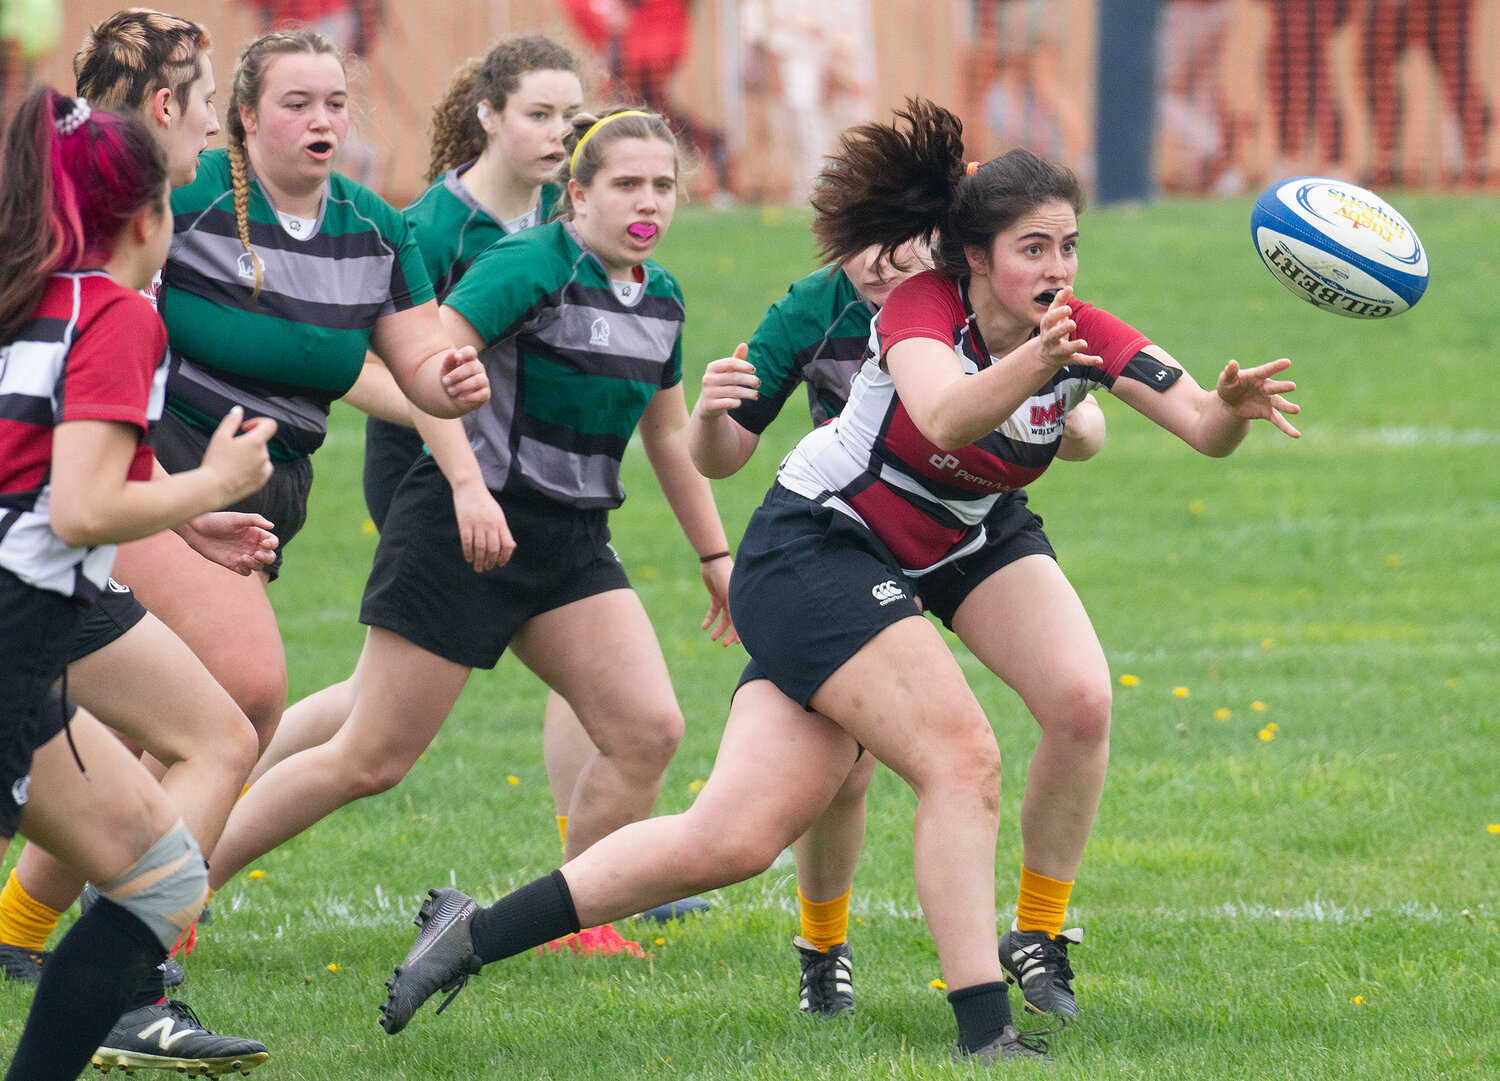 University of Massachusetts fly half Bella Pomeroy tosses the ball to a teammate during a game against the University of Vermont (UMV), which romped to a 66-0 victory on Saturday — the highest-scoring game in the bracket.